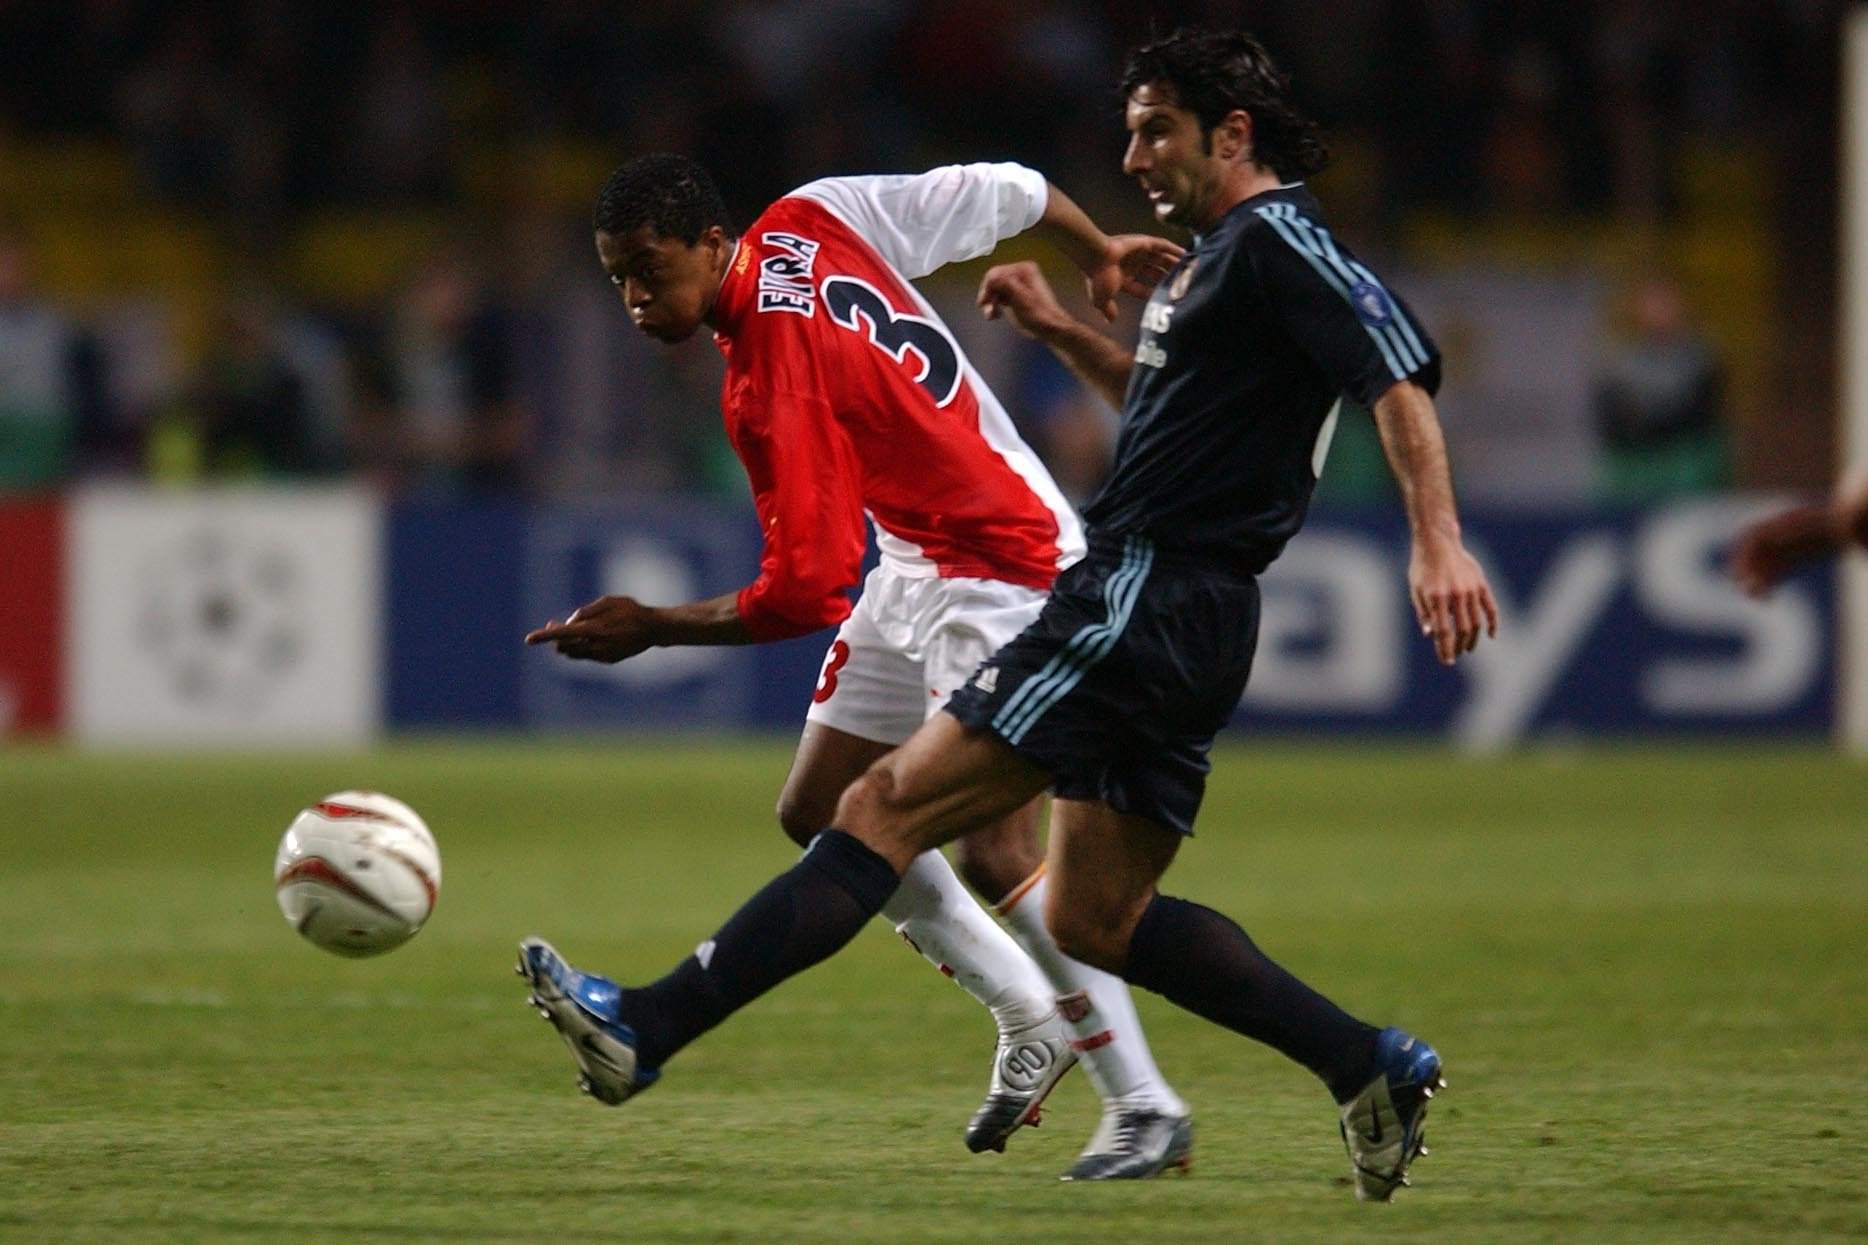 06.04.2004, Stade Louis II, Monaco, MCO, UEFA CL, AS Monaco vs Real Madrid, Viertelfinale, im Bild evra patrice, figo luis // during the UEFA Champions League quarterfinals match between AS Monaco and Real Madrid at the Stade Louis II in Monaco, Monaco on 2004/04/06. EXPA Pictures © 2018, PhotoCredit: EXPA/ Pressesports/ PREVOST *****ATTENTION - for AUT, SLO, CRO, SRB, BIH, MAZ, POL only***** LIGA MISTRZOW PILKA NOZNA MECZ MONACO VS REAL MADRYT FOT.EXPA/NEWSPIX.PL Austria, Italy, Spain, Slovenia, Serbia, Croatia, Germany, UK, USA and Sweden OUT! --- Newspix.pl *** Local Caption *** www.newspix.pl mail us: info@newspix.pl call us: 0048 022 23 22 222 --- Polish Picture Agency by Ringier Axel Springer Poland